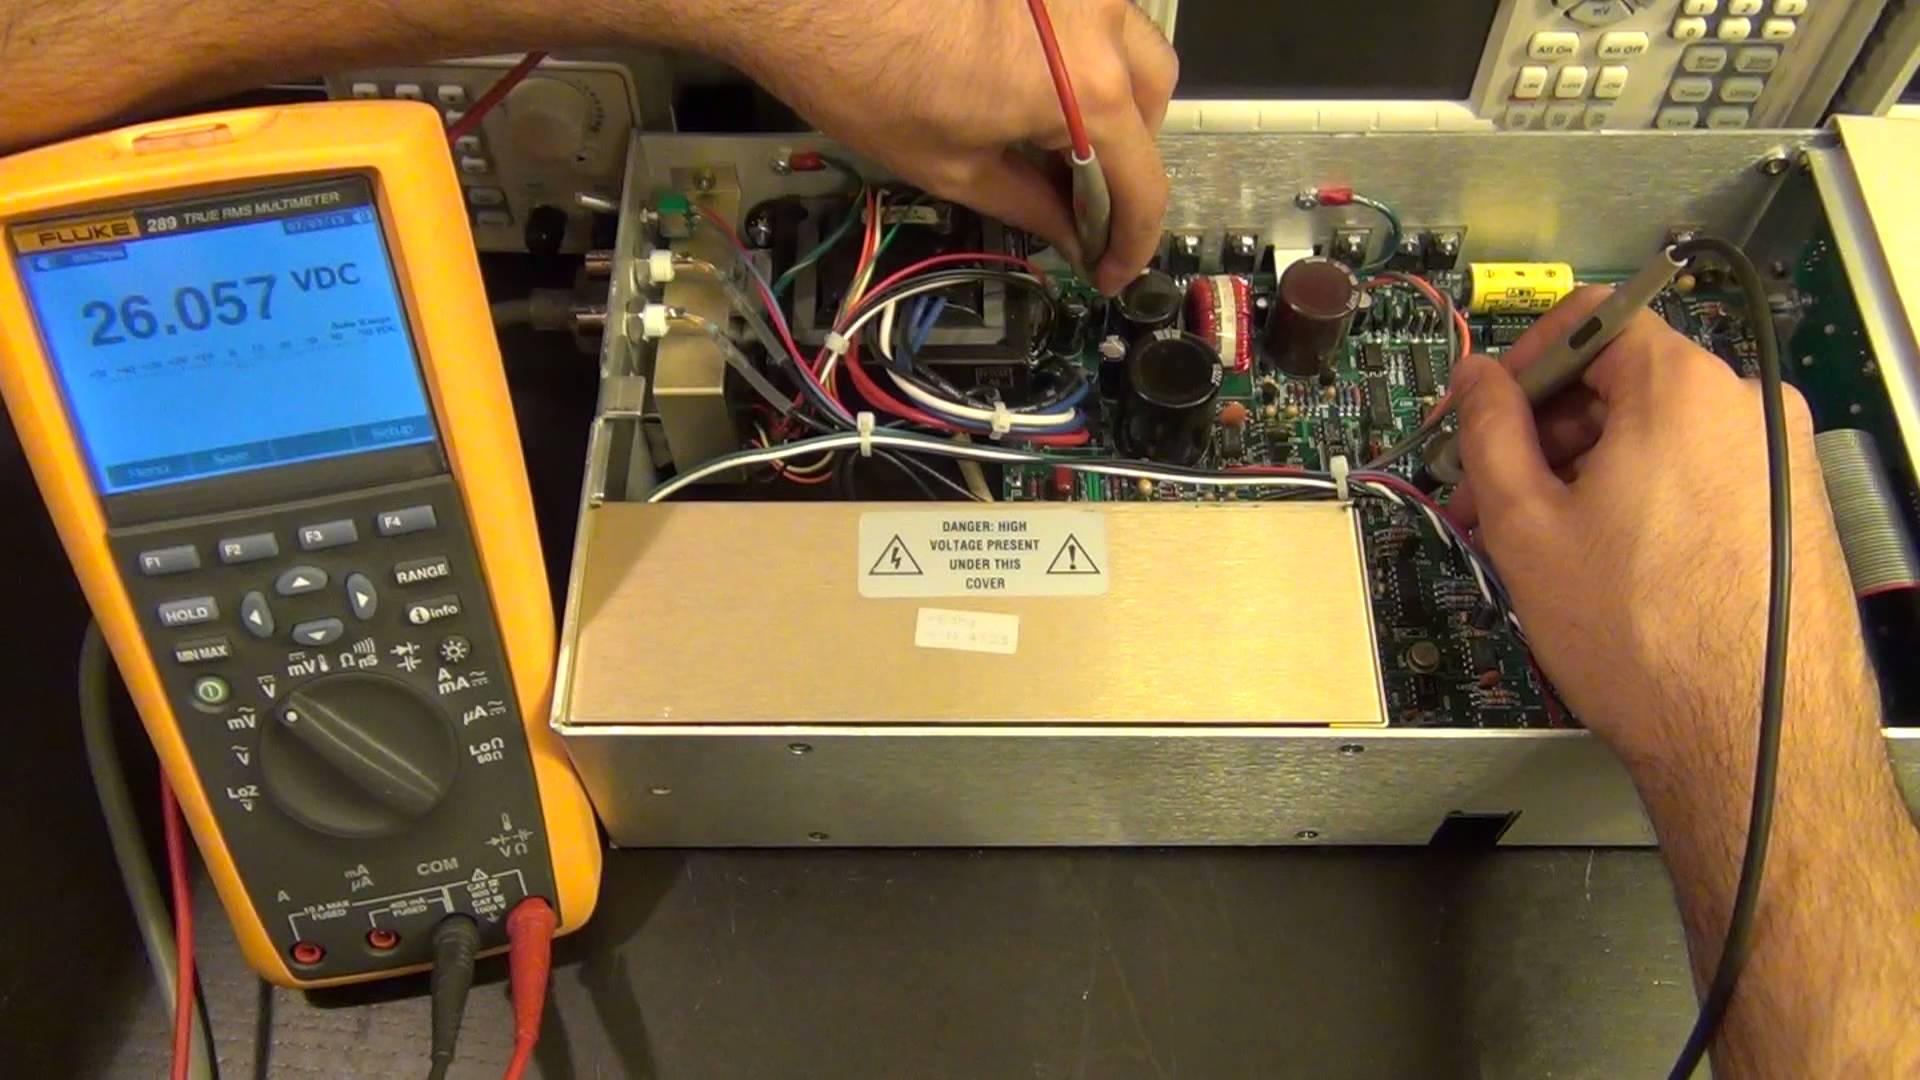 Teardown & Repair of a Stanford Research PS350 5000V, 25W High Voltage Power Supply